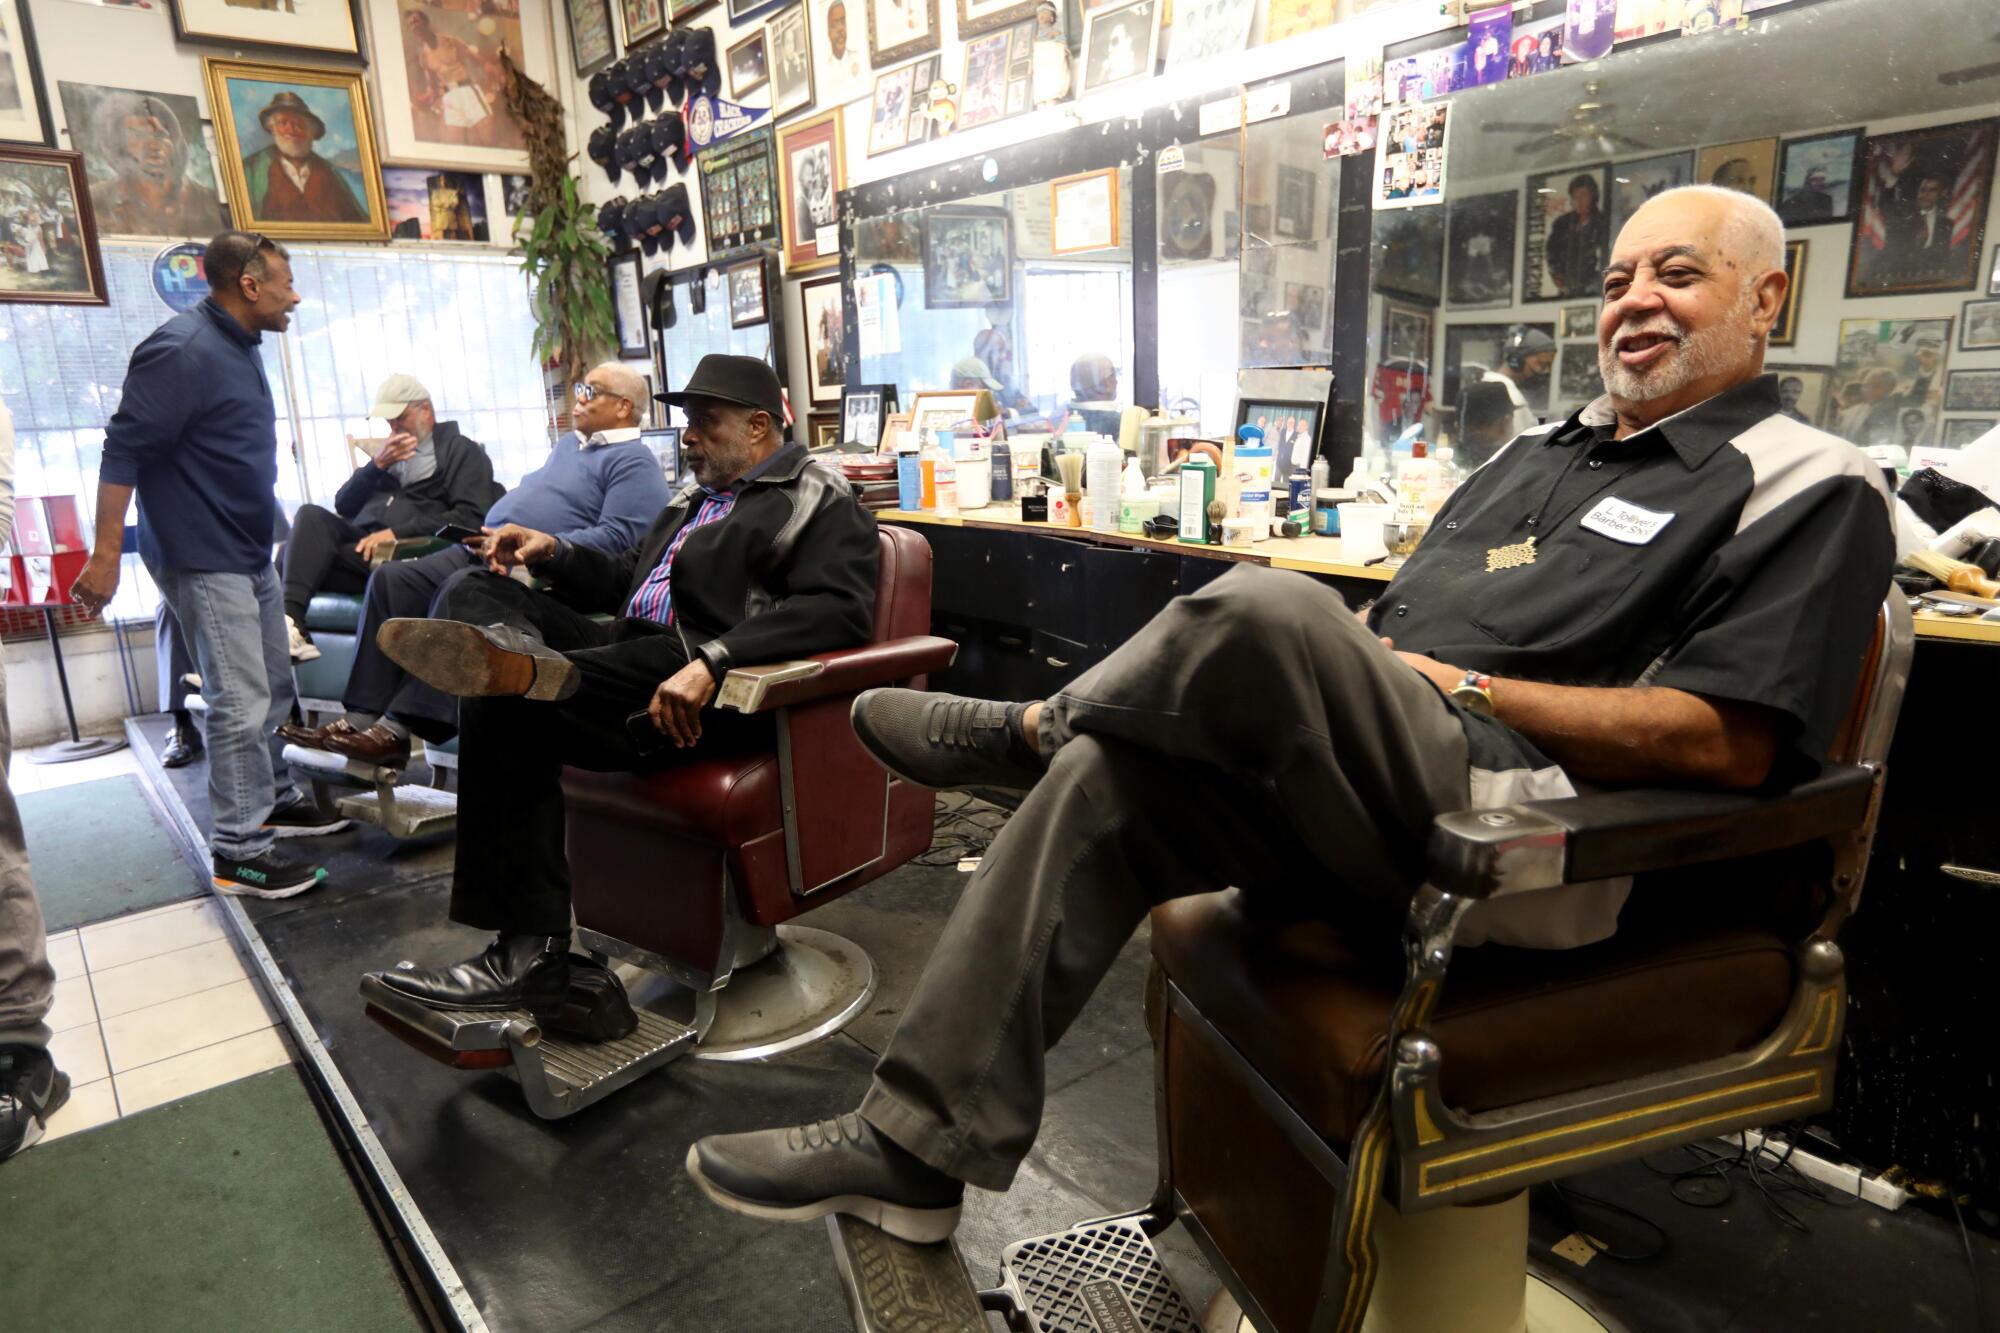 Lawrence Tolliver waits for customers while others converse about issues of the day at Tolliver's Barbershop.